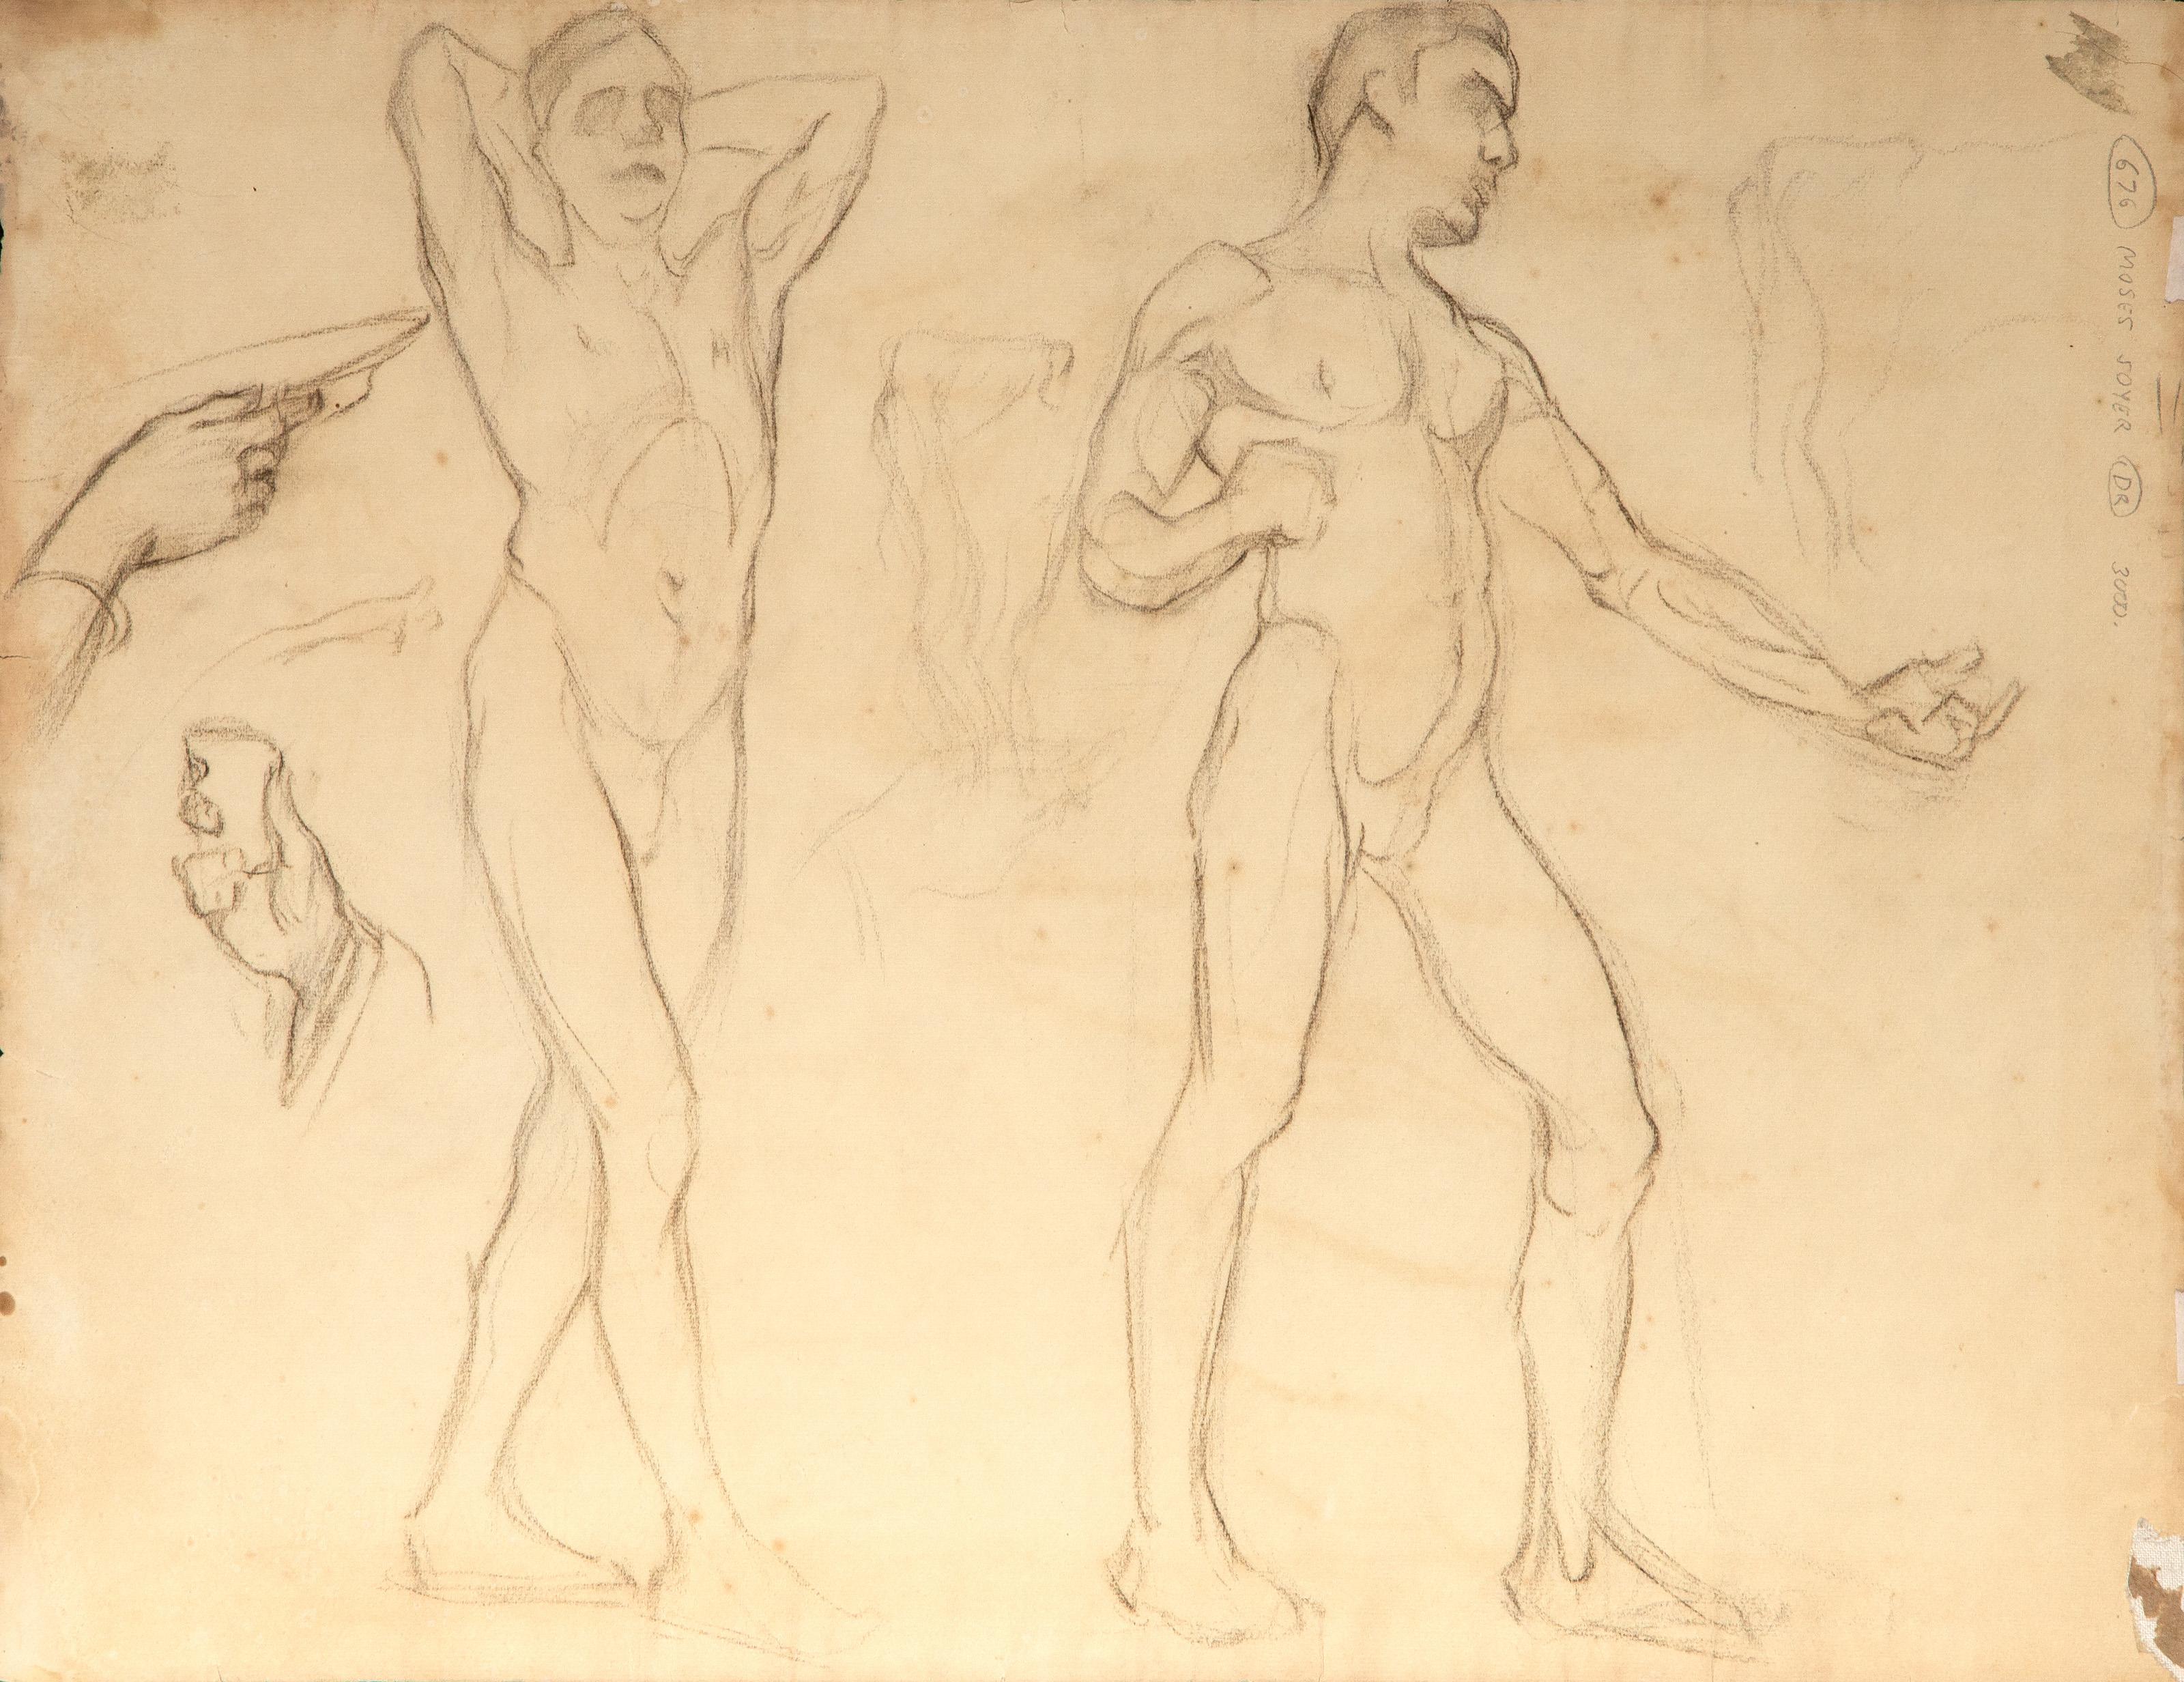 Moses Soyer, American (1899 - 1974) -  Double-Sided Anatomy Drawings. Medium: Double-sided Graphite drawing on paper, signed in pencil lower right, Size: 24.25 x 18.25 in. (61.6 x 46.36 cm) 